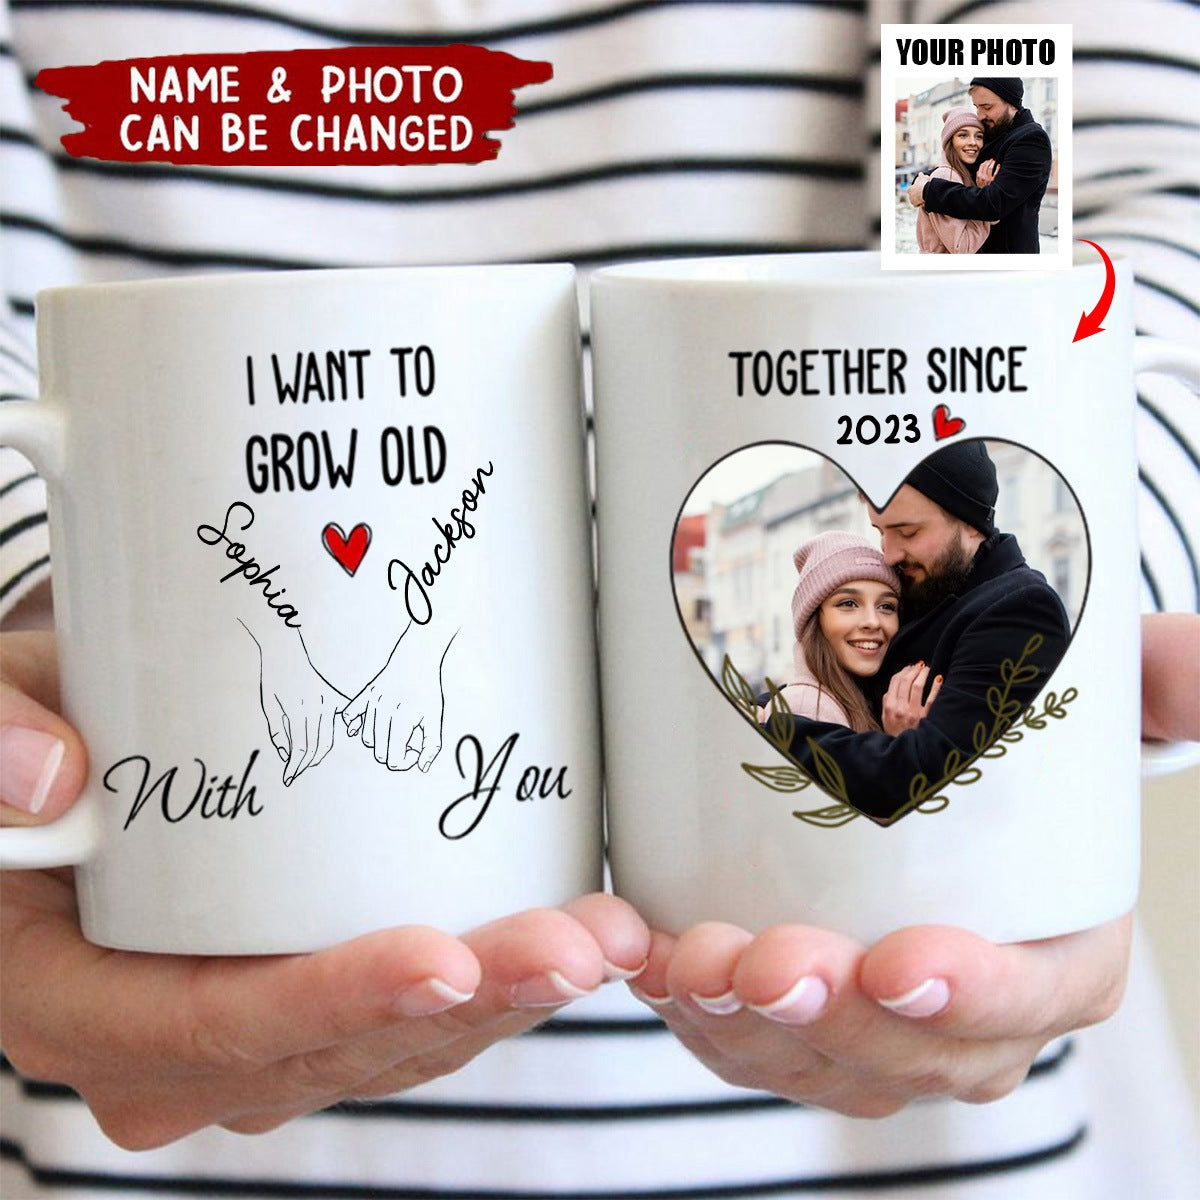 I Want To Grow Old With You - Personalized Mug - Gifts For Couple